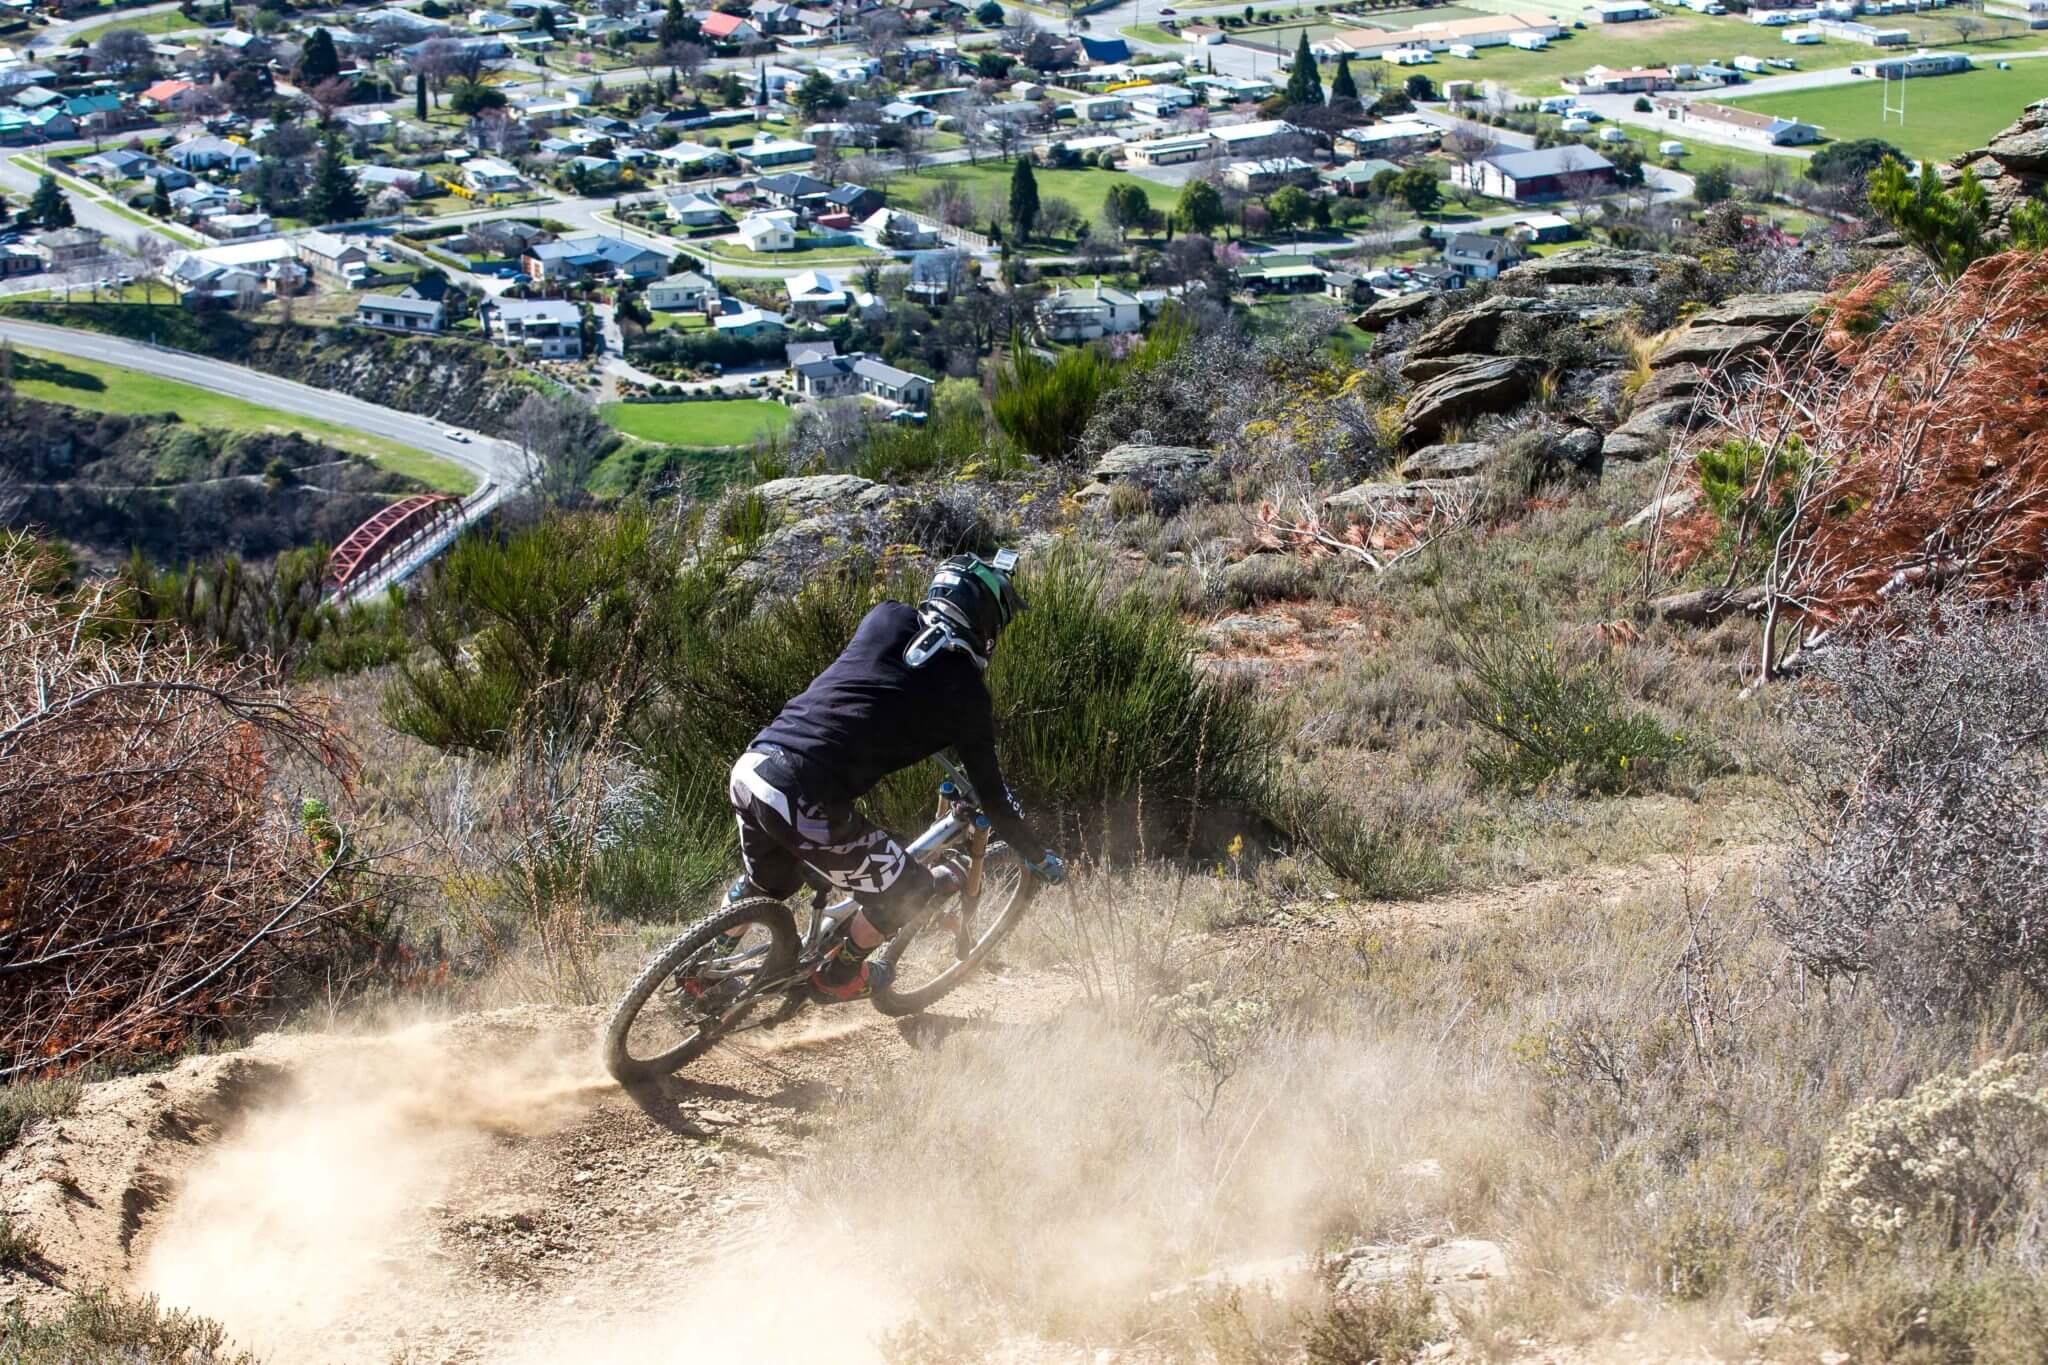 Biking at Clyde a day trip from Queenstown, epic downhill mountain biking